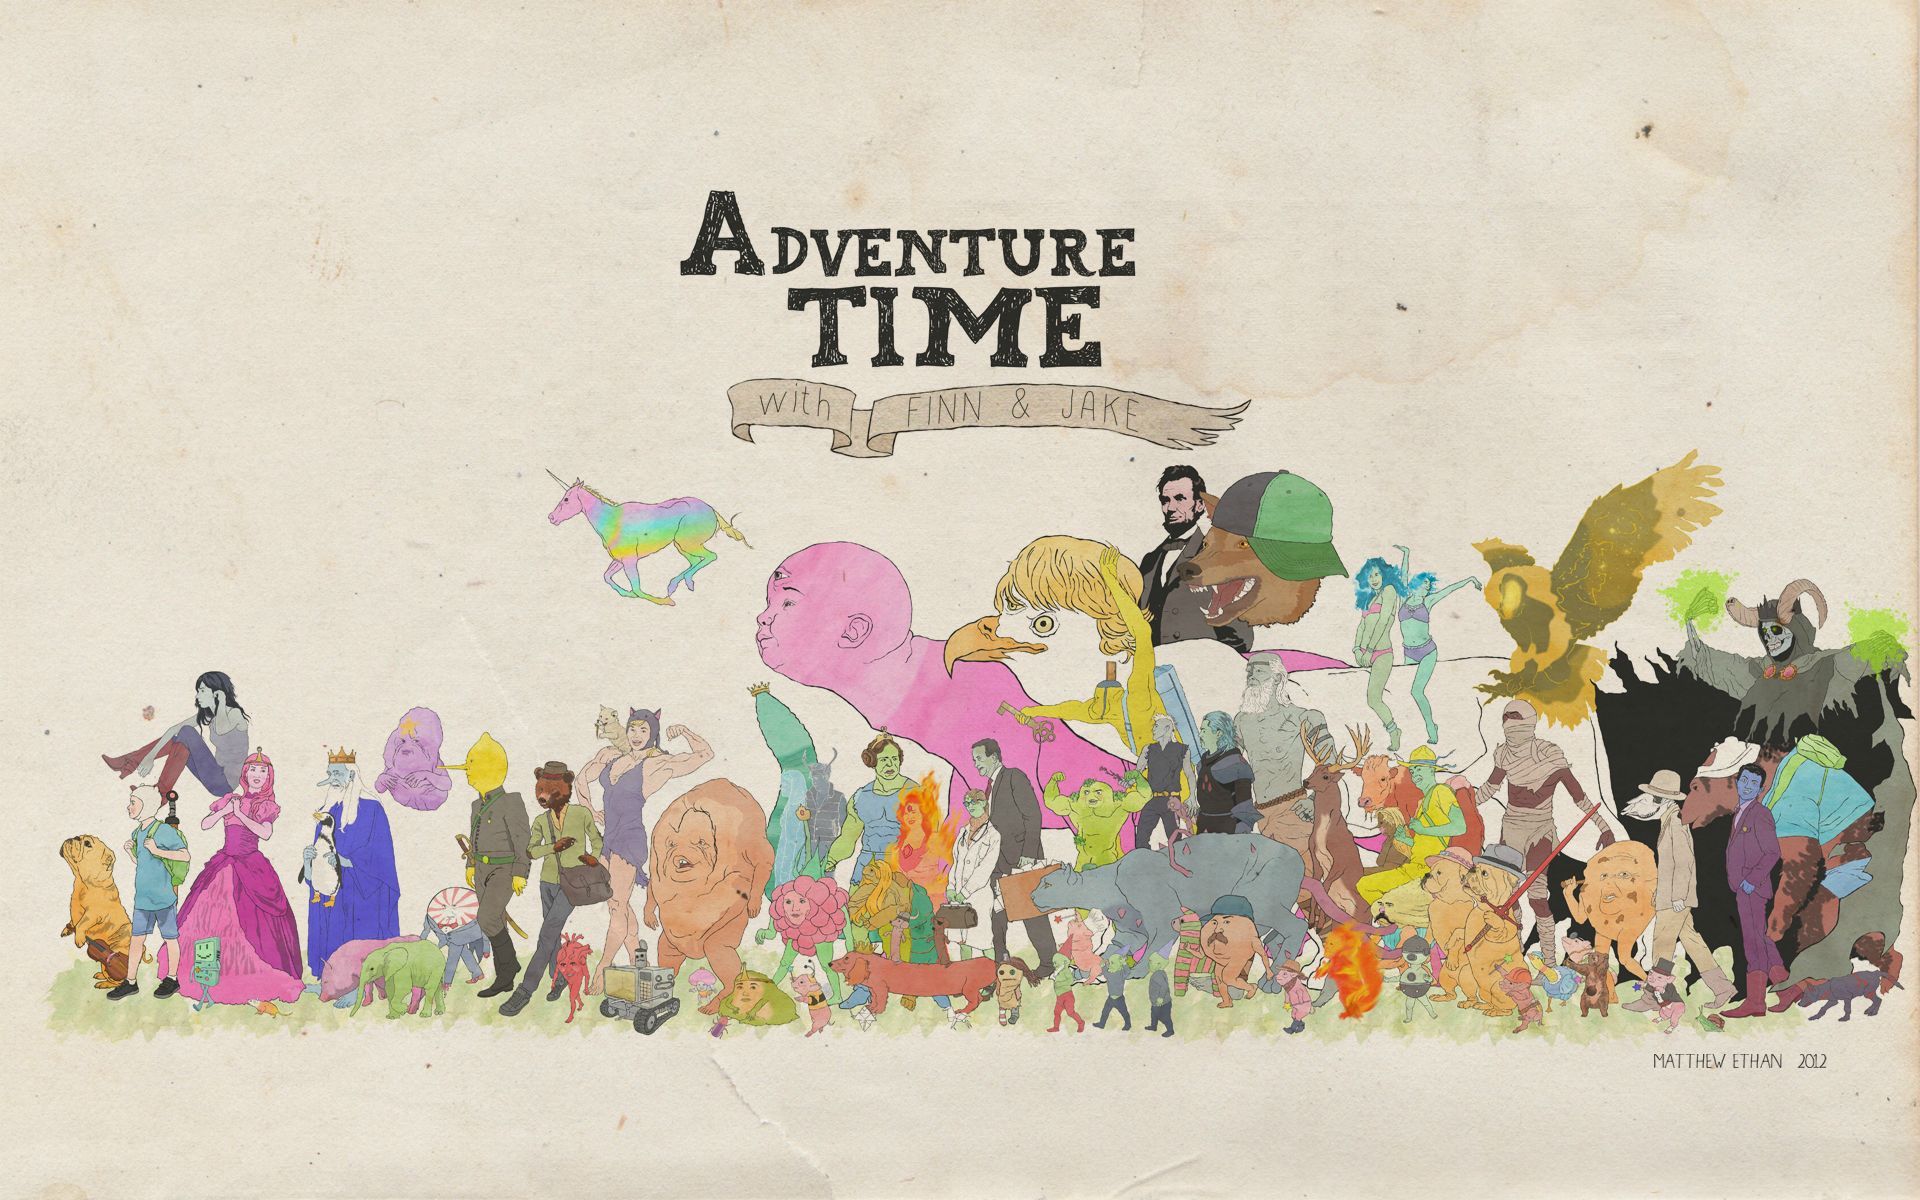 1920x1200px Adventure Time Wallpapers | #285699